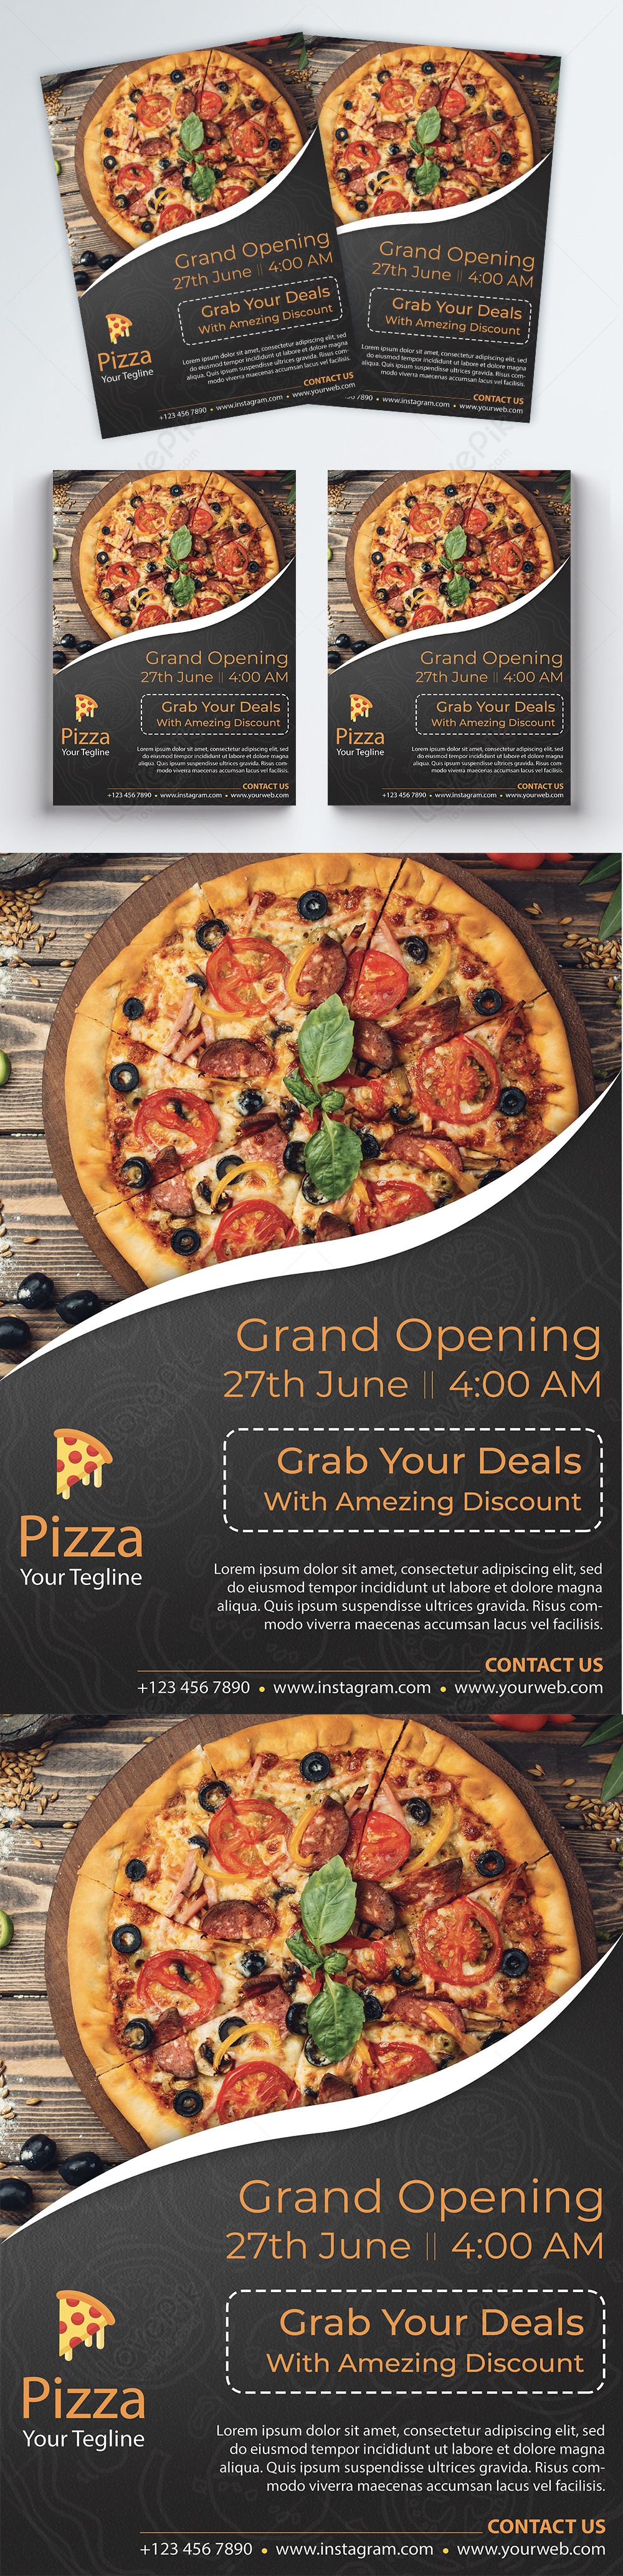 Pizza Promotional Flyer Template Image Picture Free Download Lovepik Com